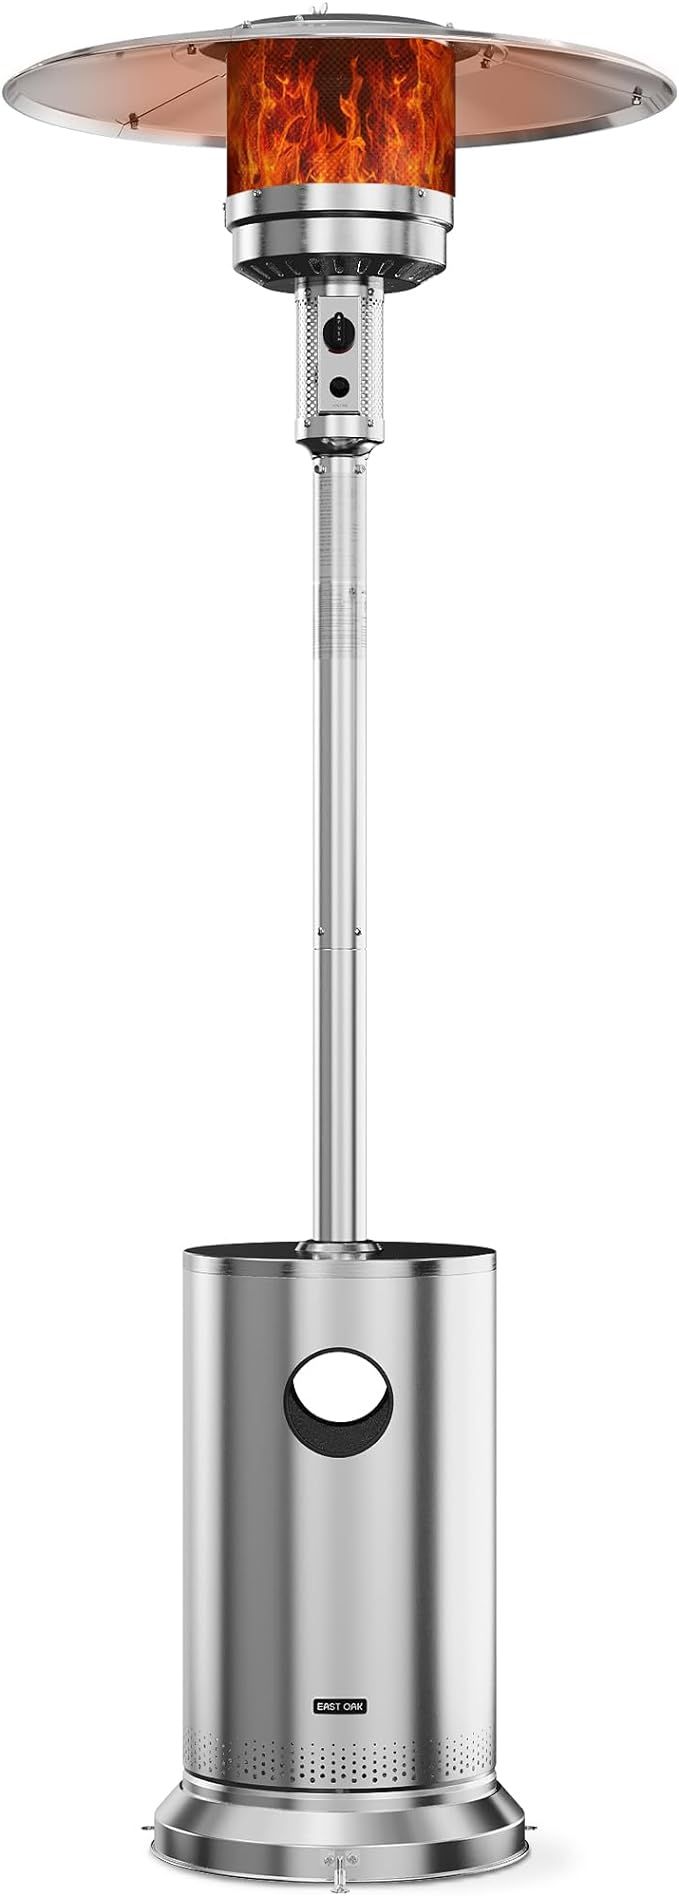 EAST OAK 48,000 BTU Patio Heater for Outdoor Use With Round Table Design, Double-Layer Stainless ... | Amazon (US)